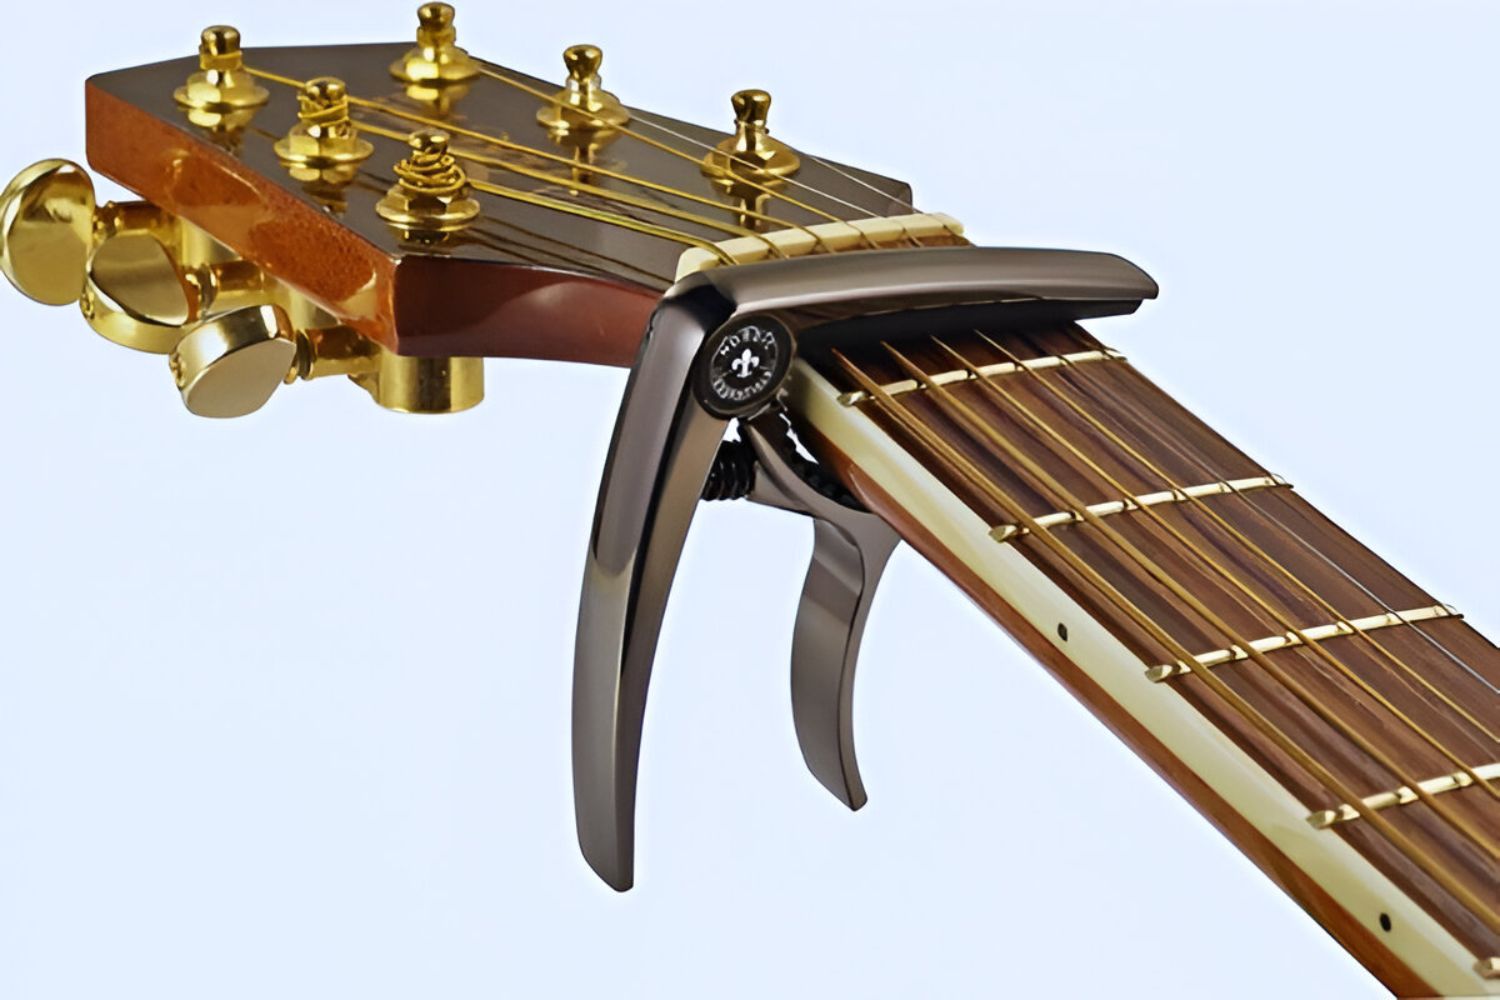 What Is a Capo?